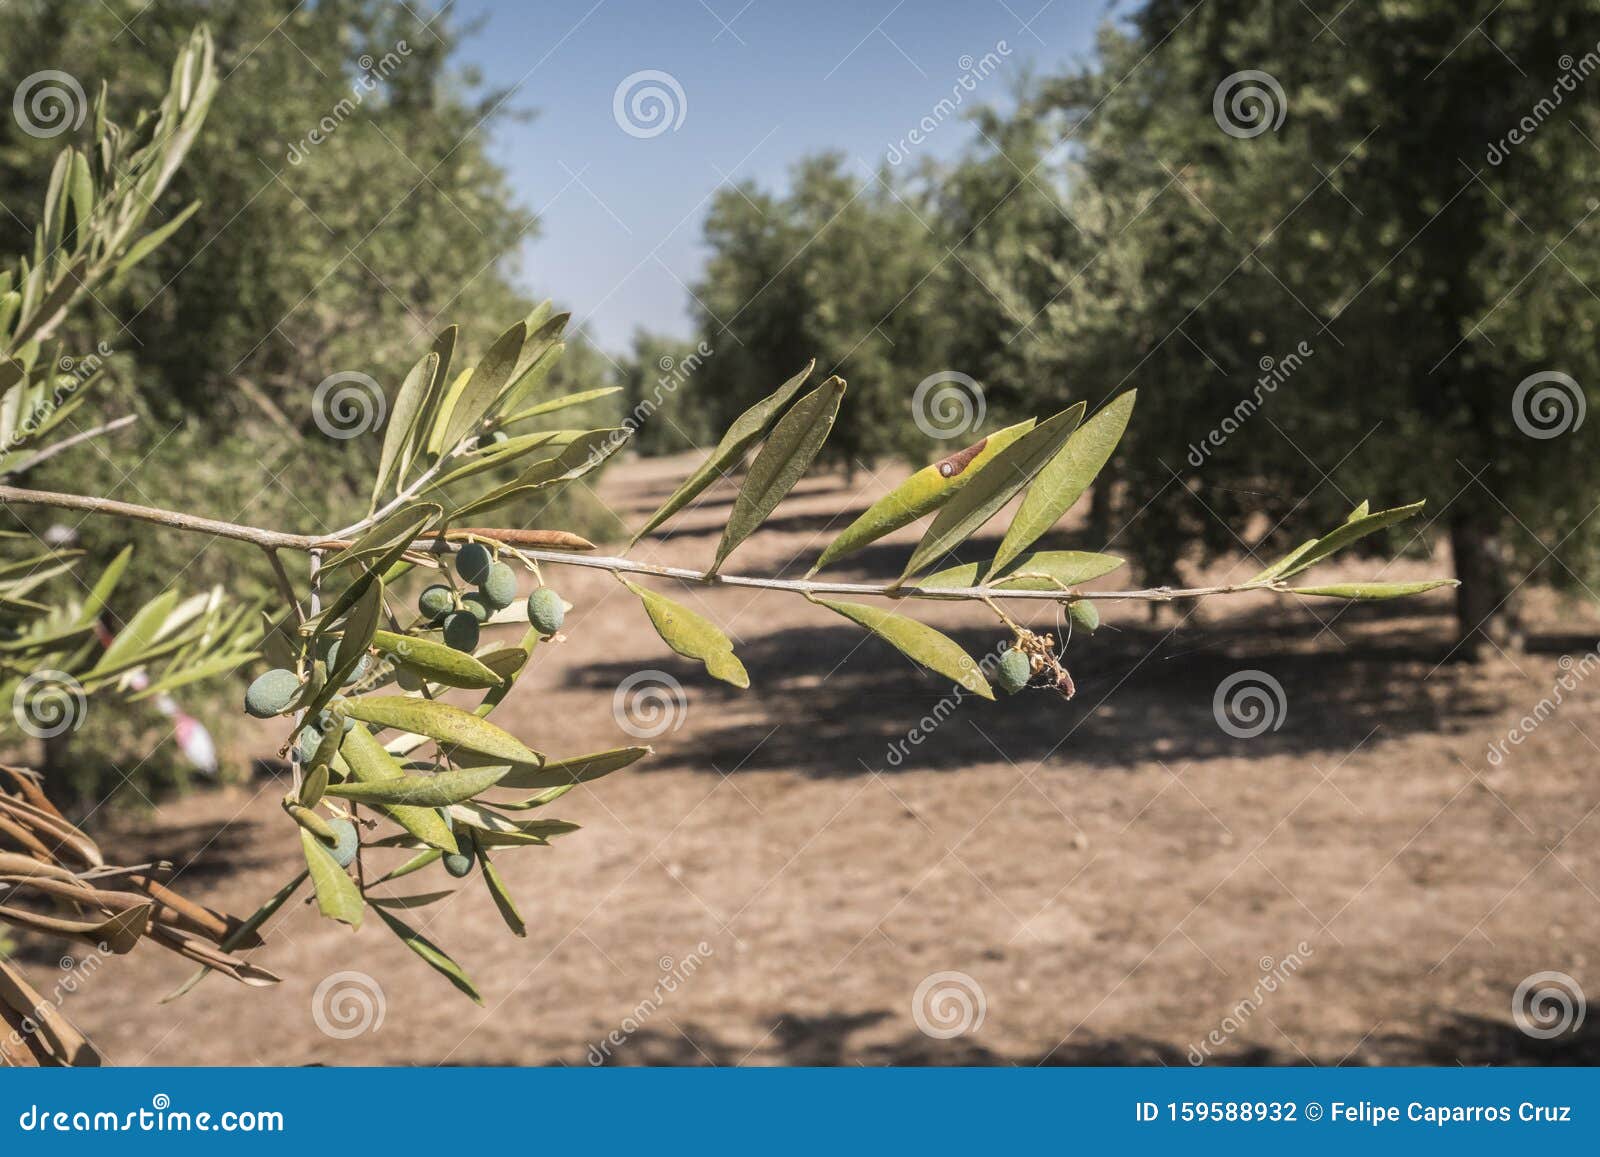 olive trees infected by the dreaded bacteria called xylella fastidiosa, is known in europe as the ebola of the olive tree